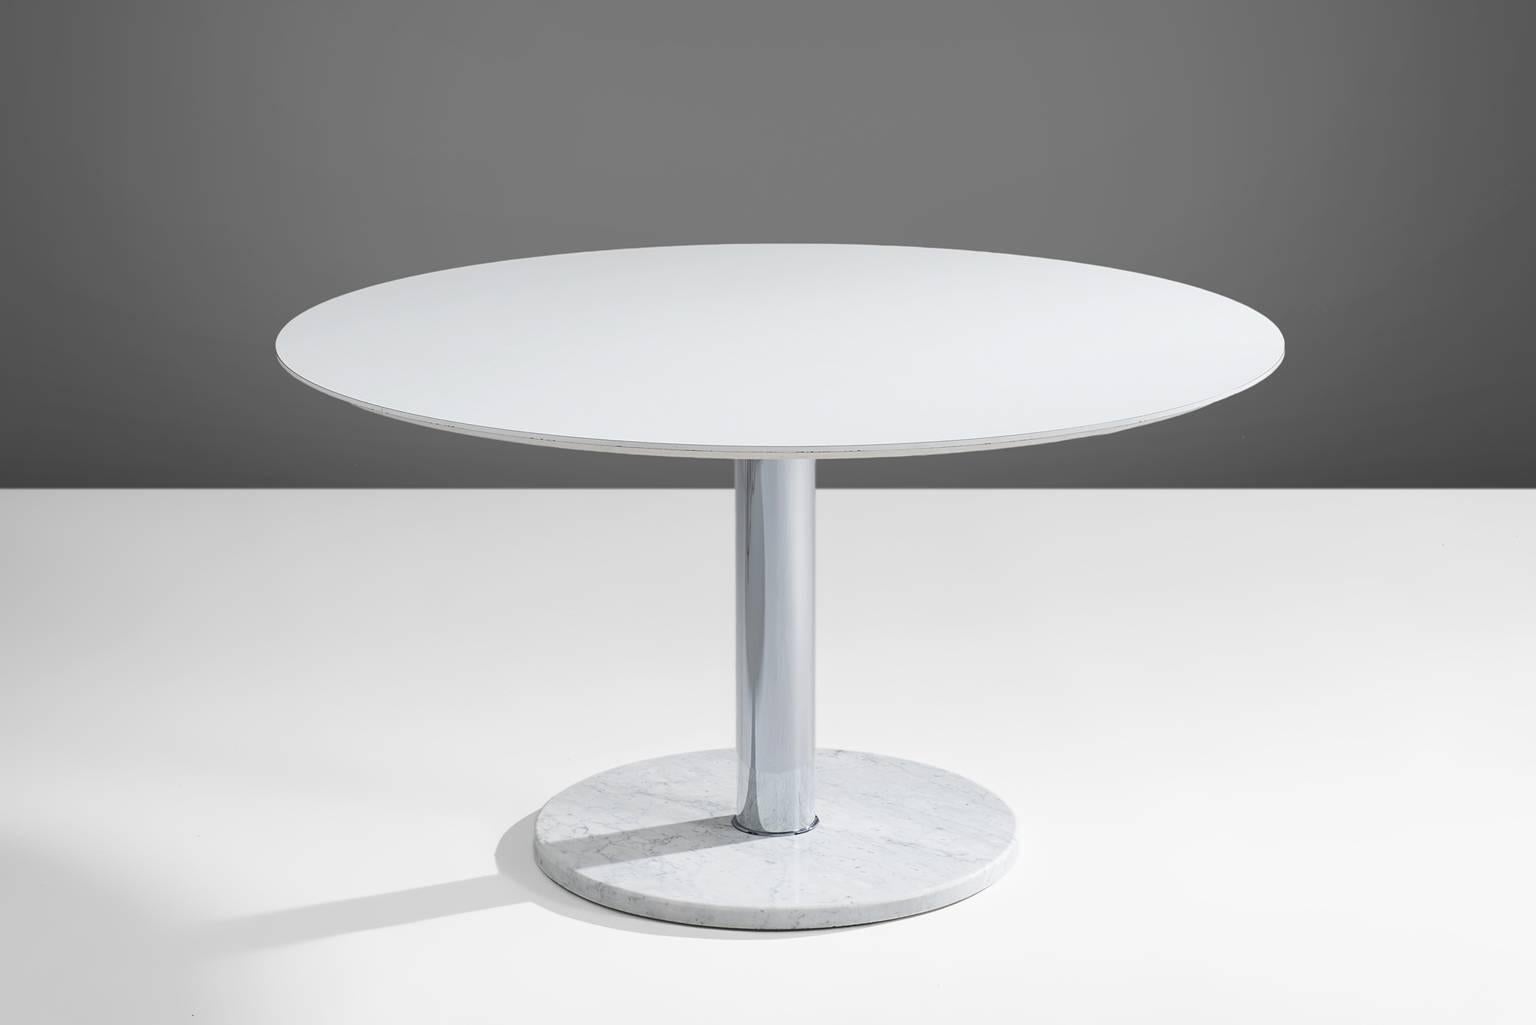 Alfred Hendrickx for Belform, pedestal dining table, Belgium, circa 1960. 

This round formica top placed on a central chrome tube. The base is made of a with marble round plate. Very modern, slick design that bears traits of the International